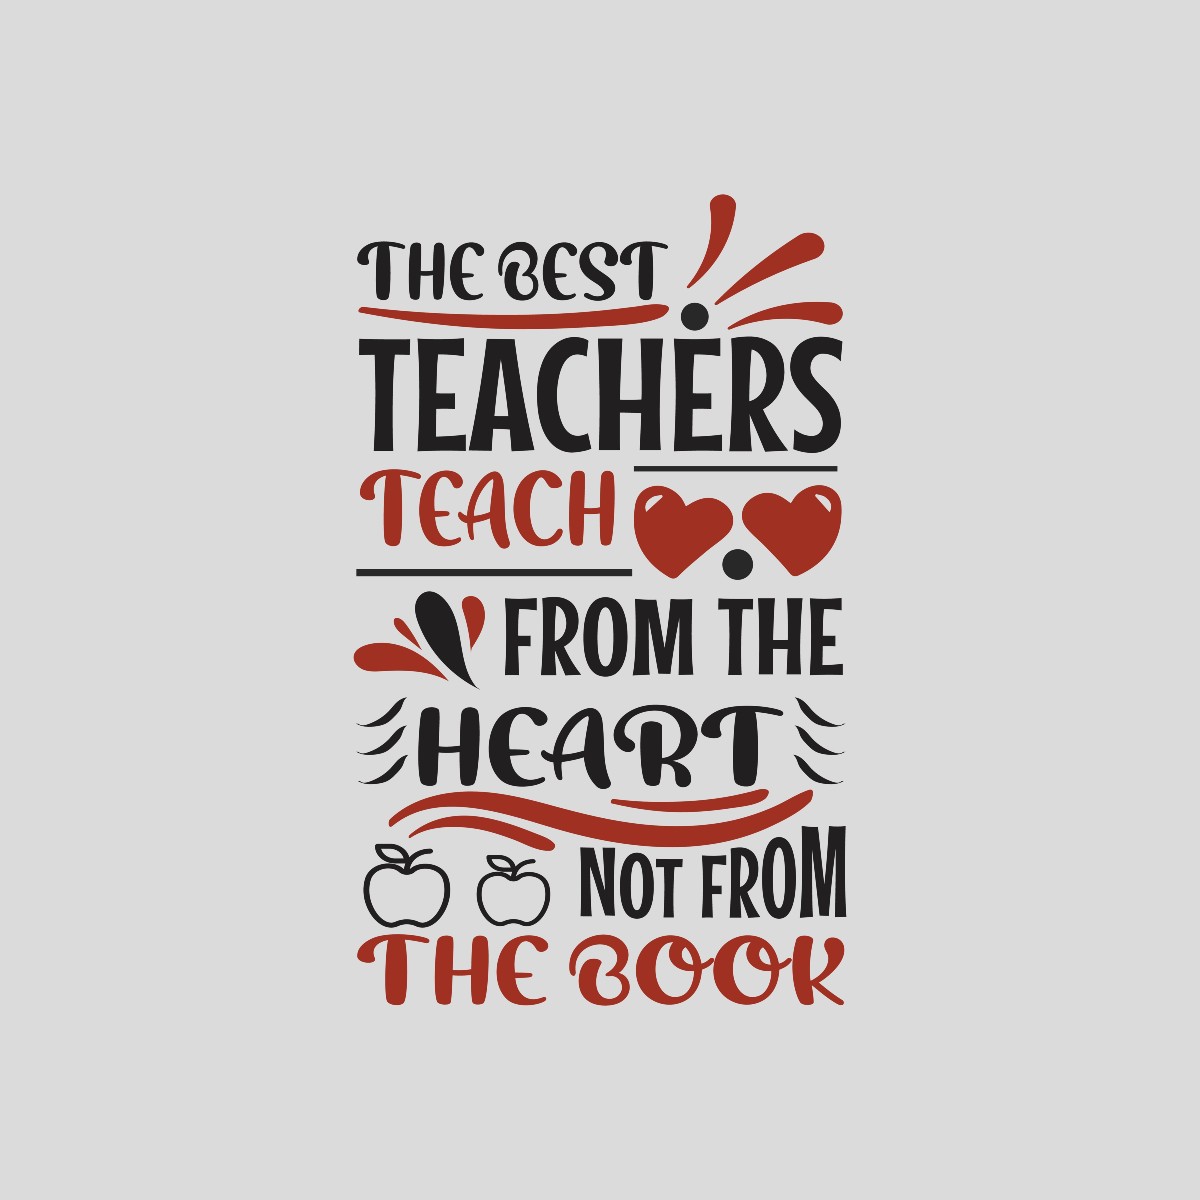 Happy Teachers’ Day 2022 Wishes, Greetings, Whatsapp Status, Images And Quotes You Can Share With Your Dear Ones. (Image: Shutterstock)  